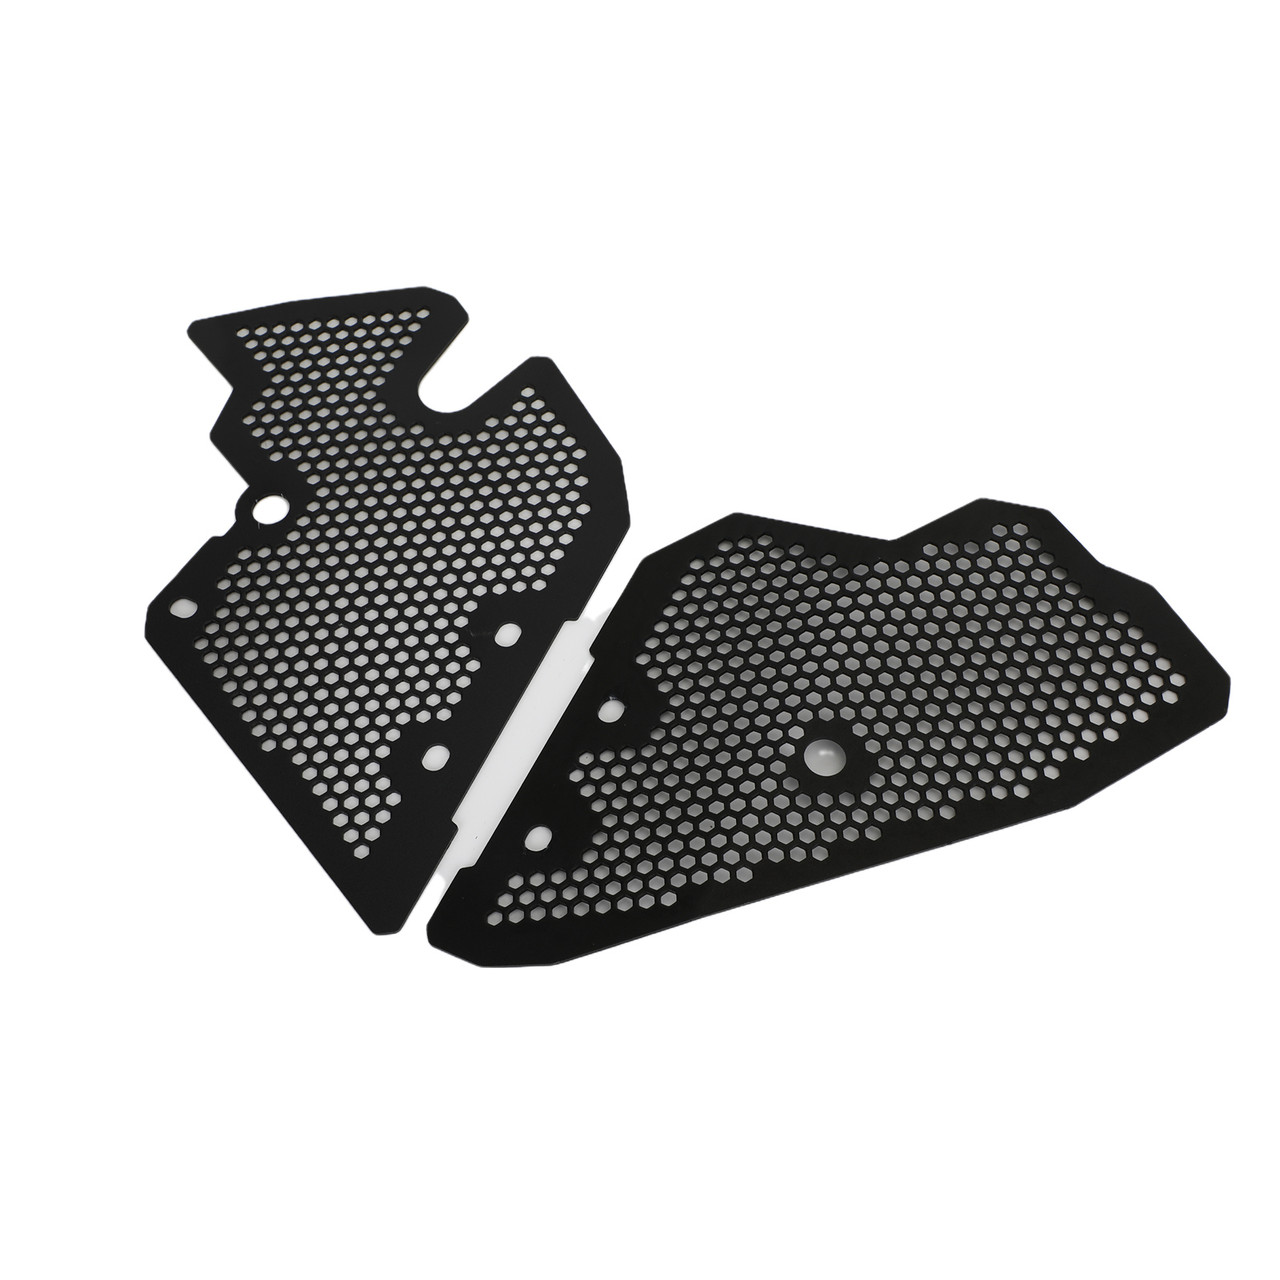 Engine Guard Guard Cover Protector Fit For Yamaha Tenere 700 Xt700Z 2019-2021 Black